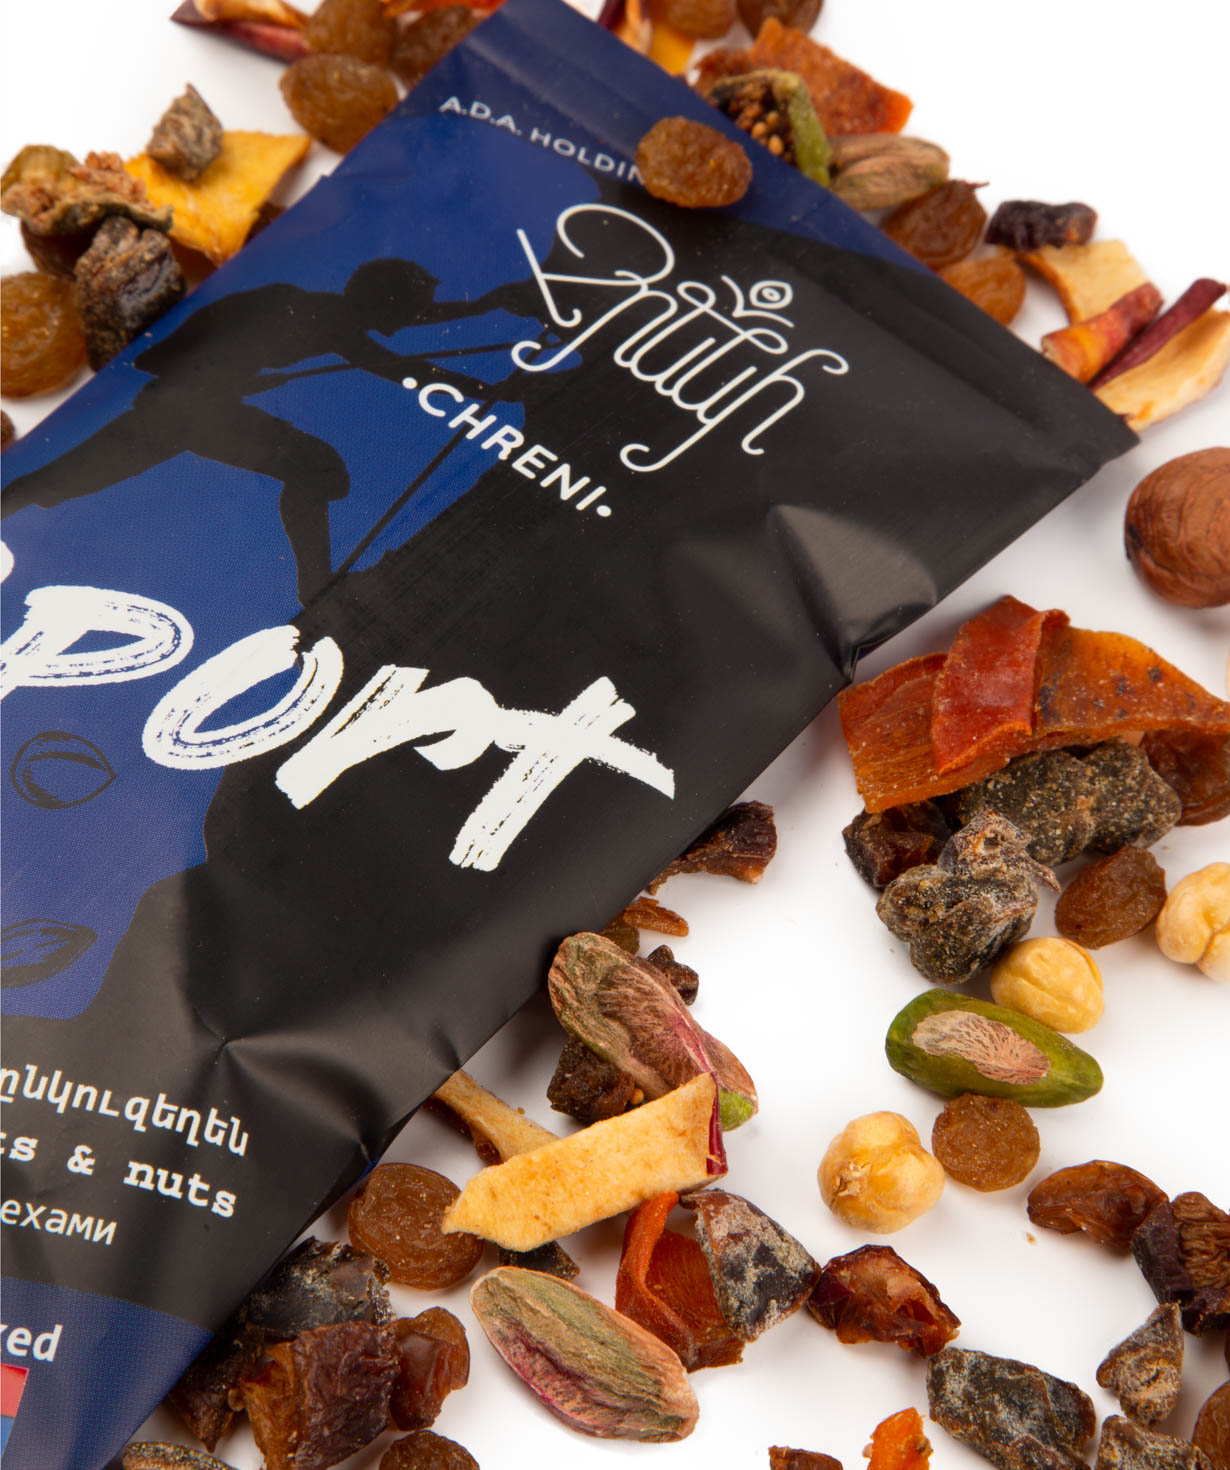 Dried fruits `Chreni Sport` with unsalted walnuts